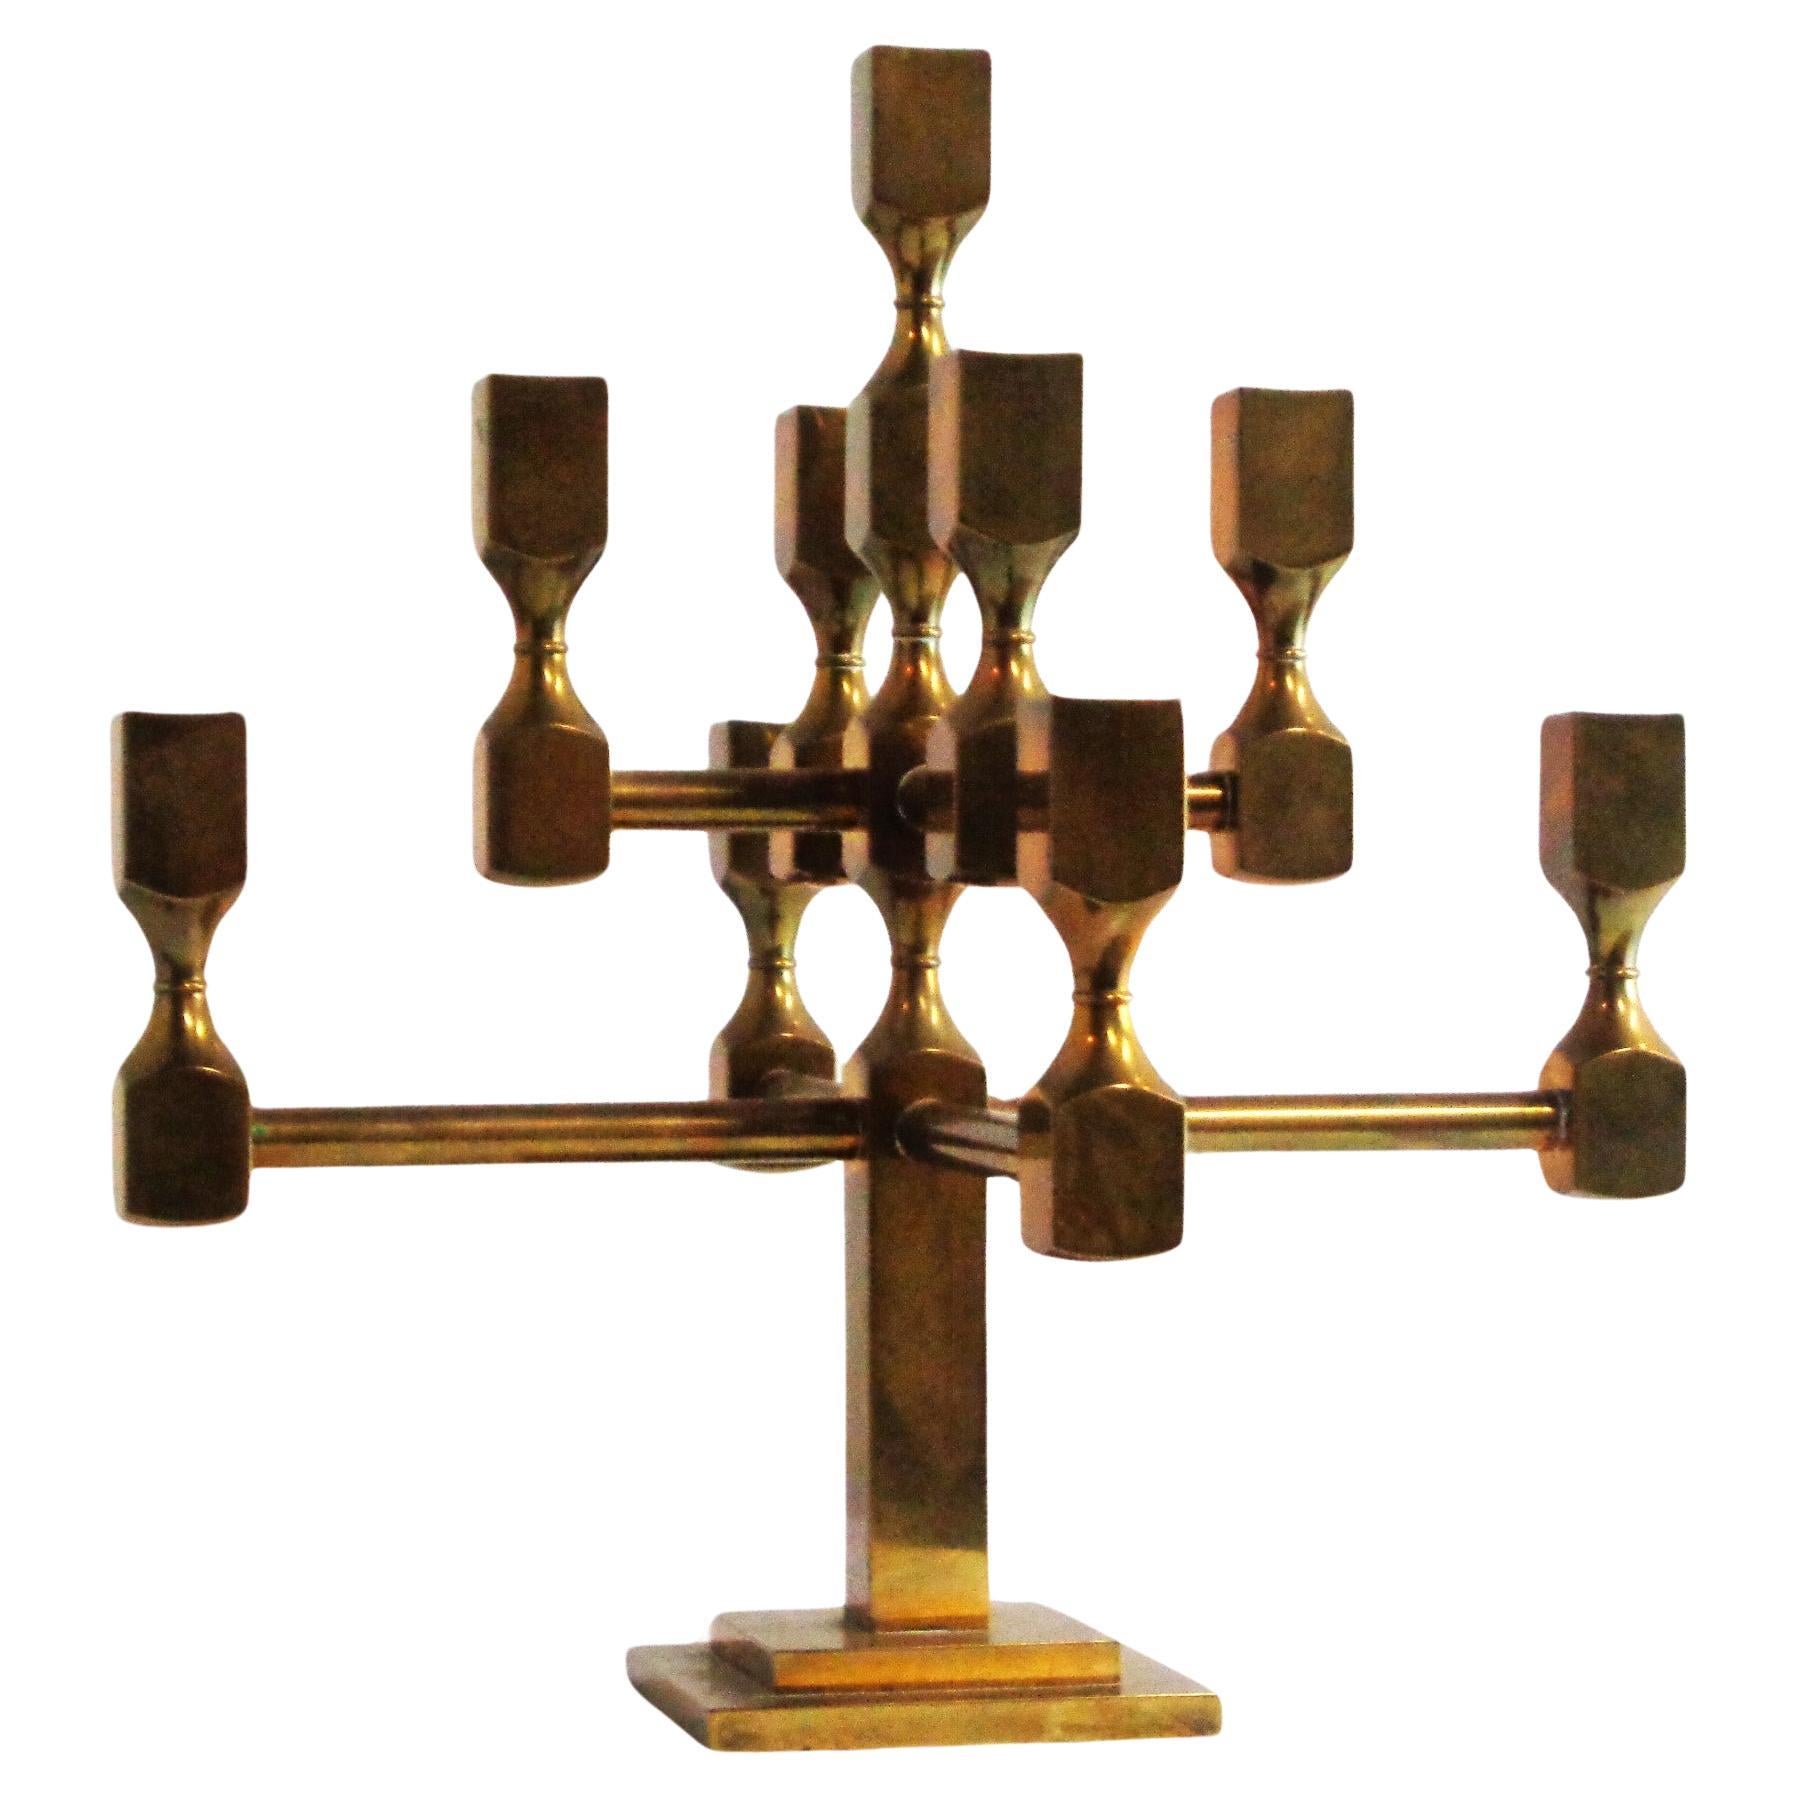  Large Brass Nine Light Candelabra by Lars Bergsten for Gusum Sweden 1984 In Good Condition For Sale In Rochester, NY